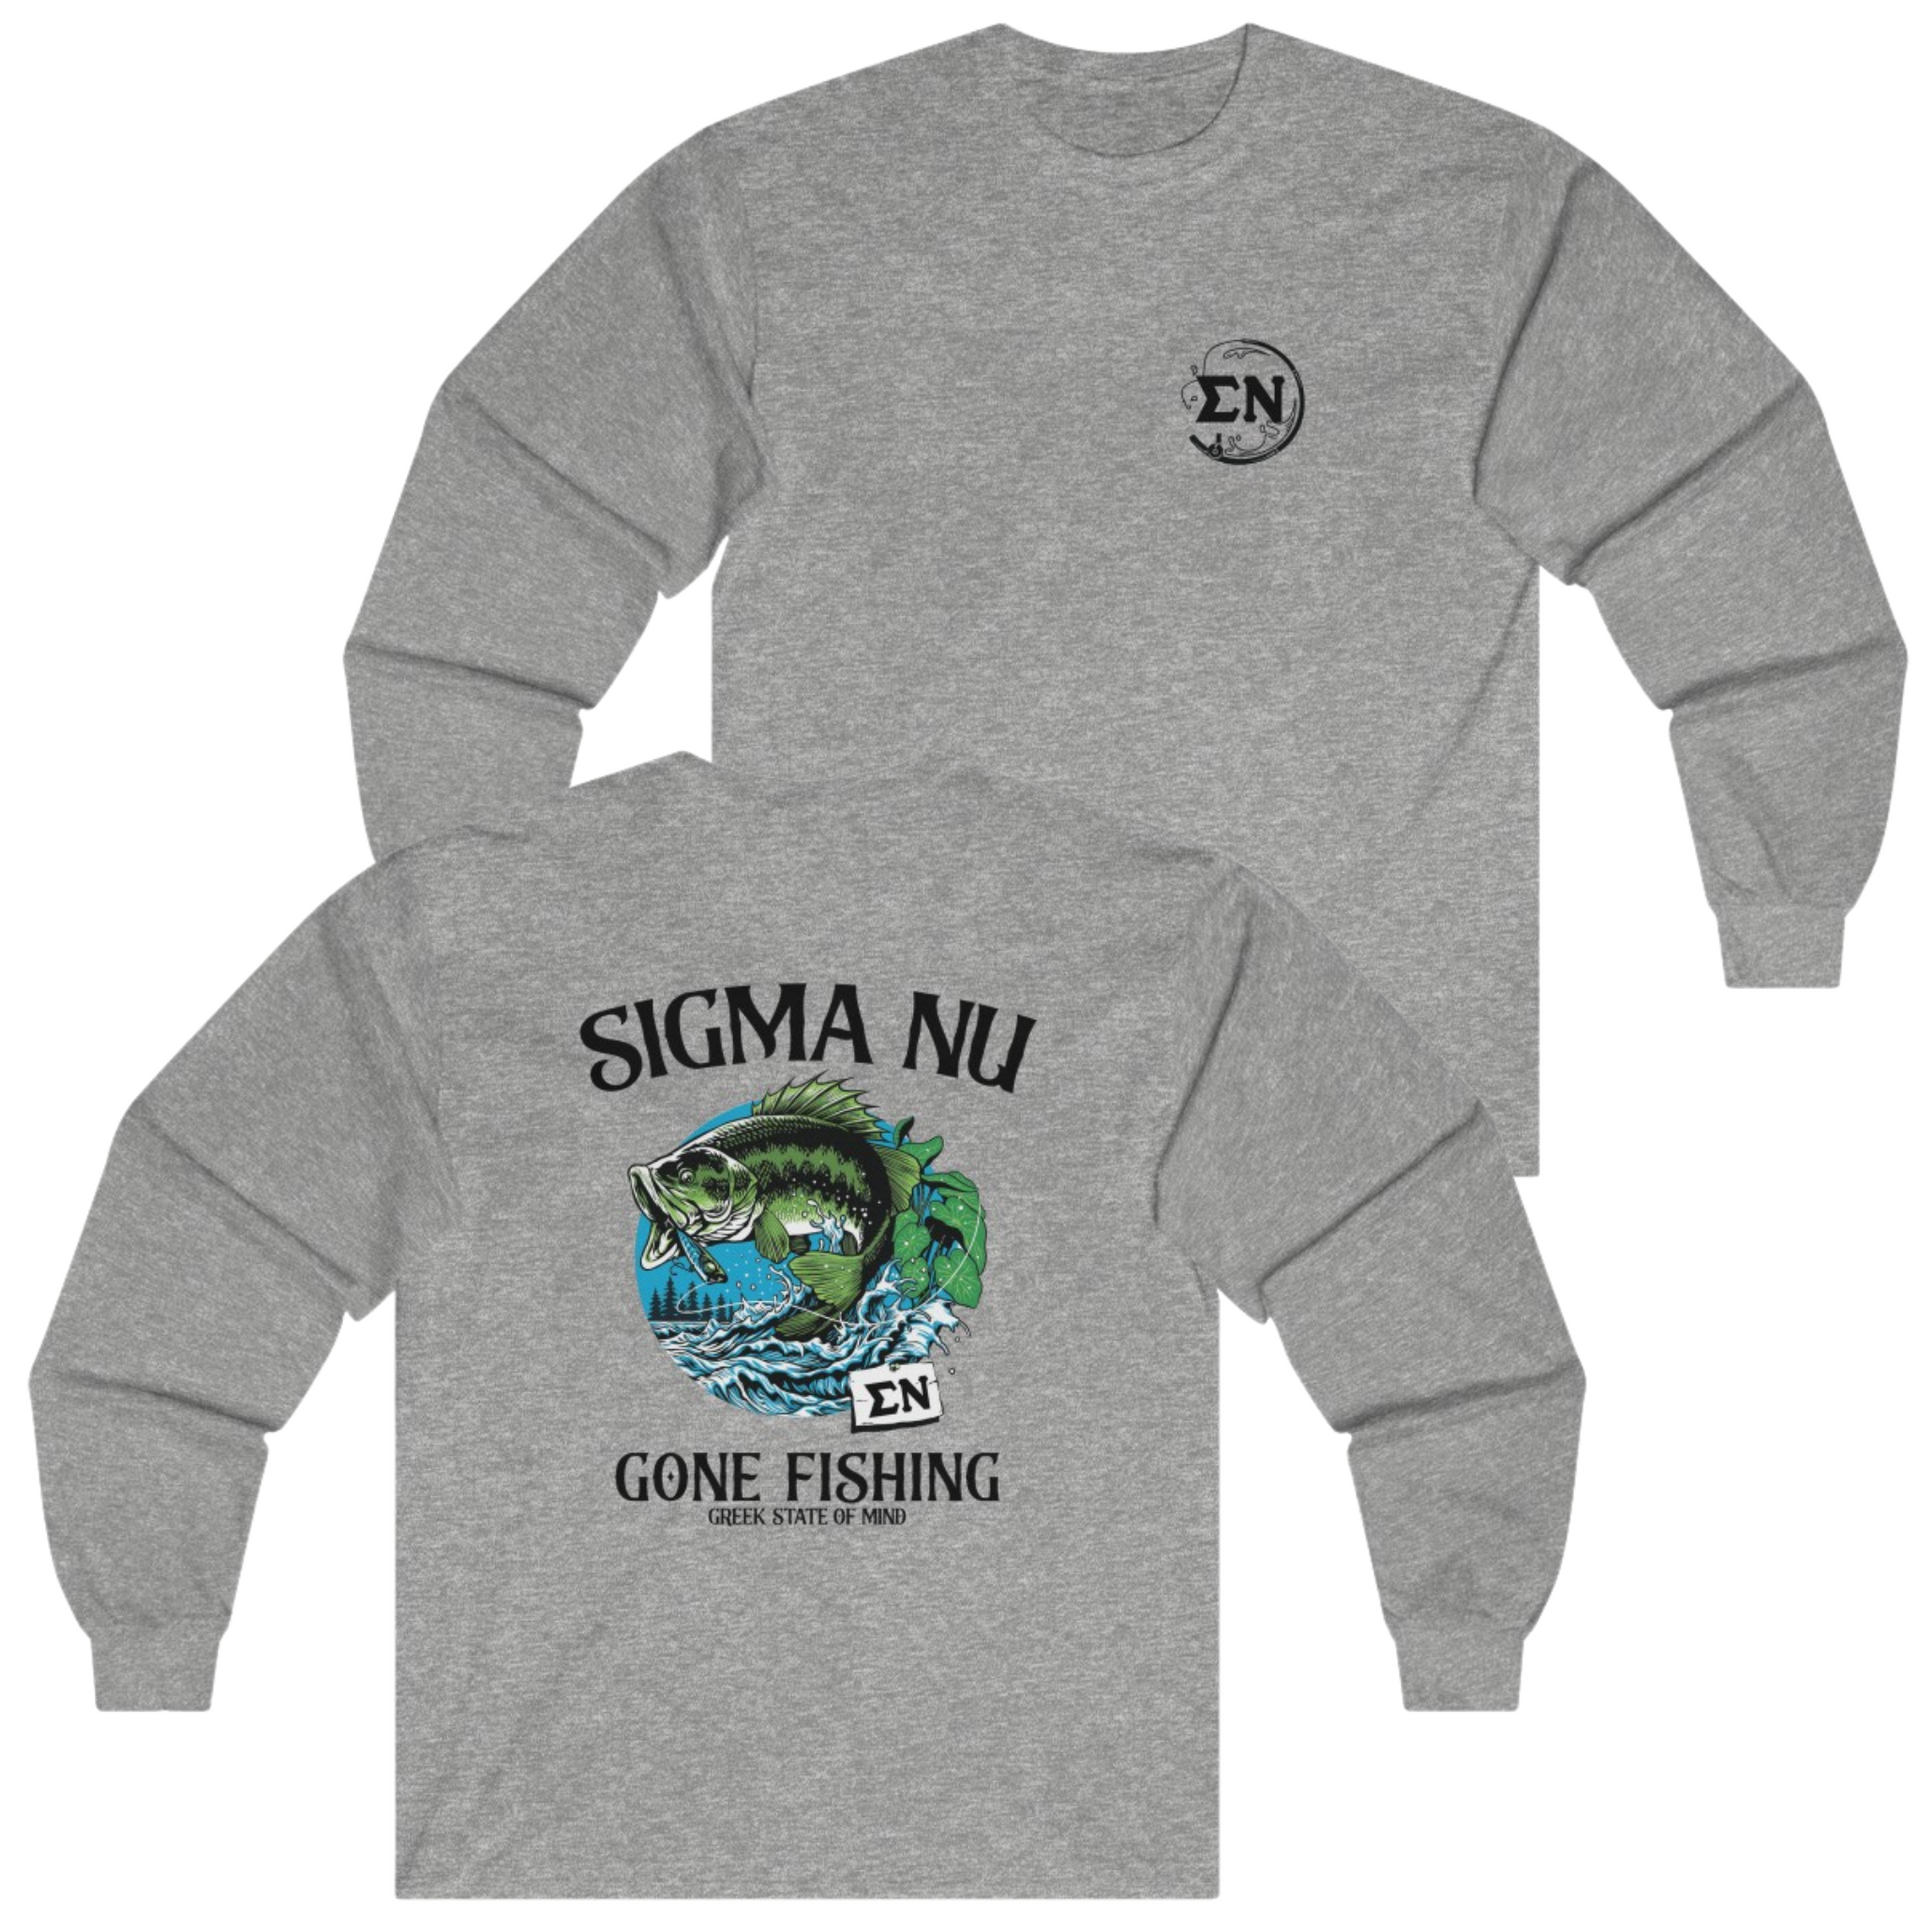 Grey Sigma Nu Graphic Long Sleeve T-Shirt | Gone Fishing | Sigma Nu Clothing, Apparel and Merchandise